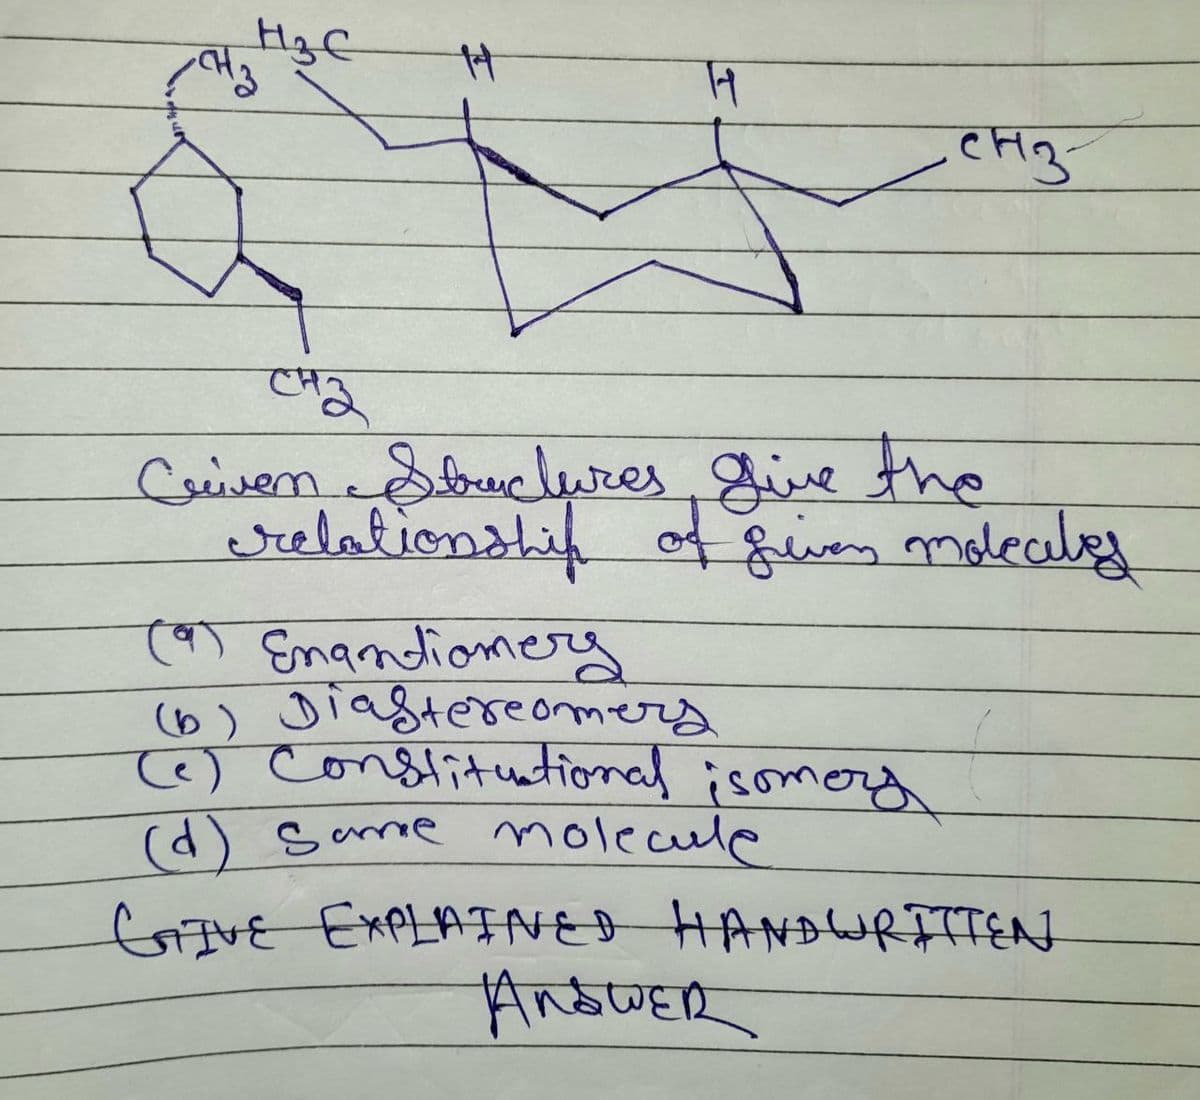 H₂C
-CH₂3
H
11
СН3-
CH₂
Criven Structures give the
relationship of given molecules
Cat Enantiomerg
(b) Diastereomers
(c) Constitutional isomery
(d) same molecule
GIVE EXPLAINED HANDWRITTEN
Anbwer